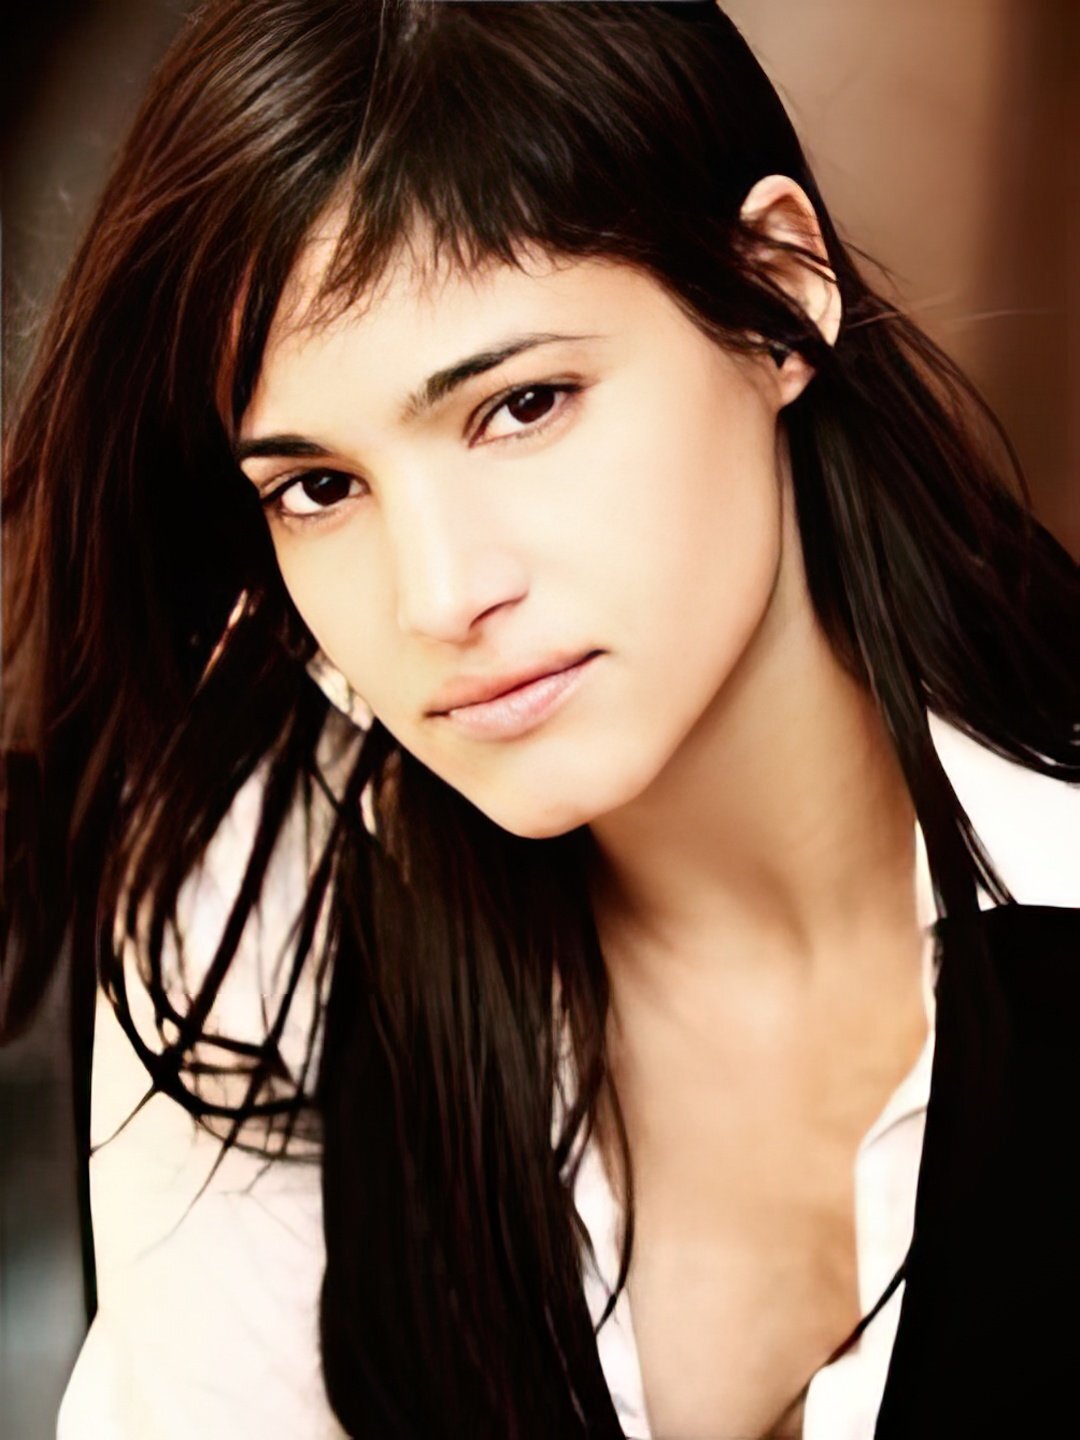 Sofia Boutella in her teens